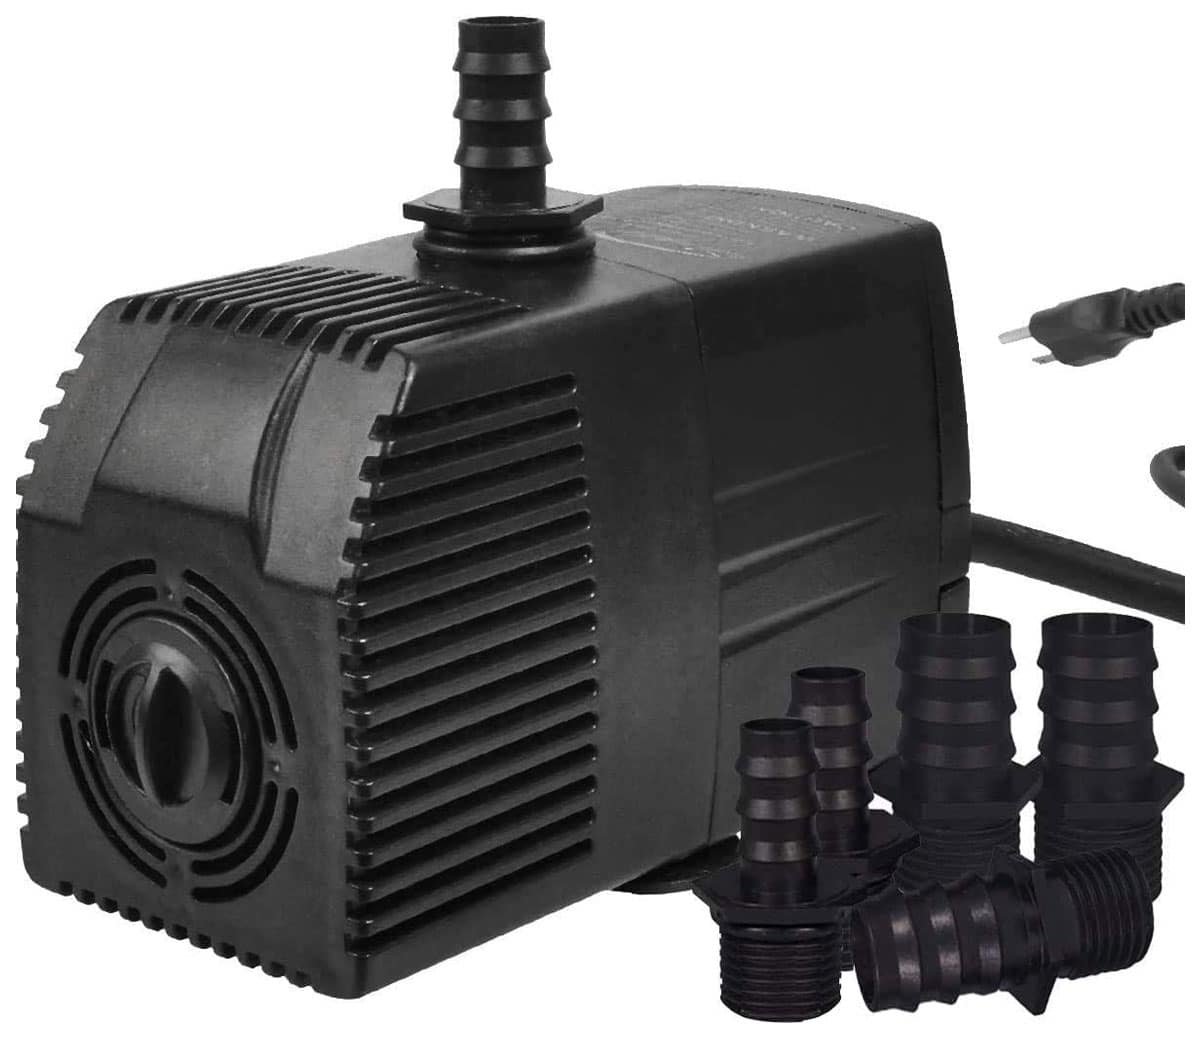 Simple Deluxe Submersible Water Pump- Best Hydroponic Water Pump